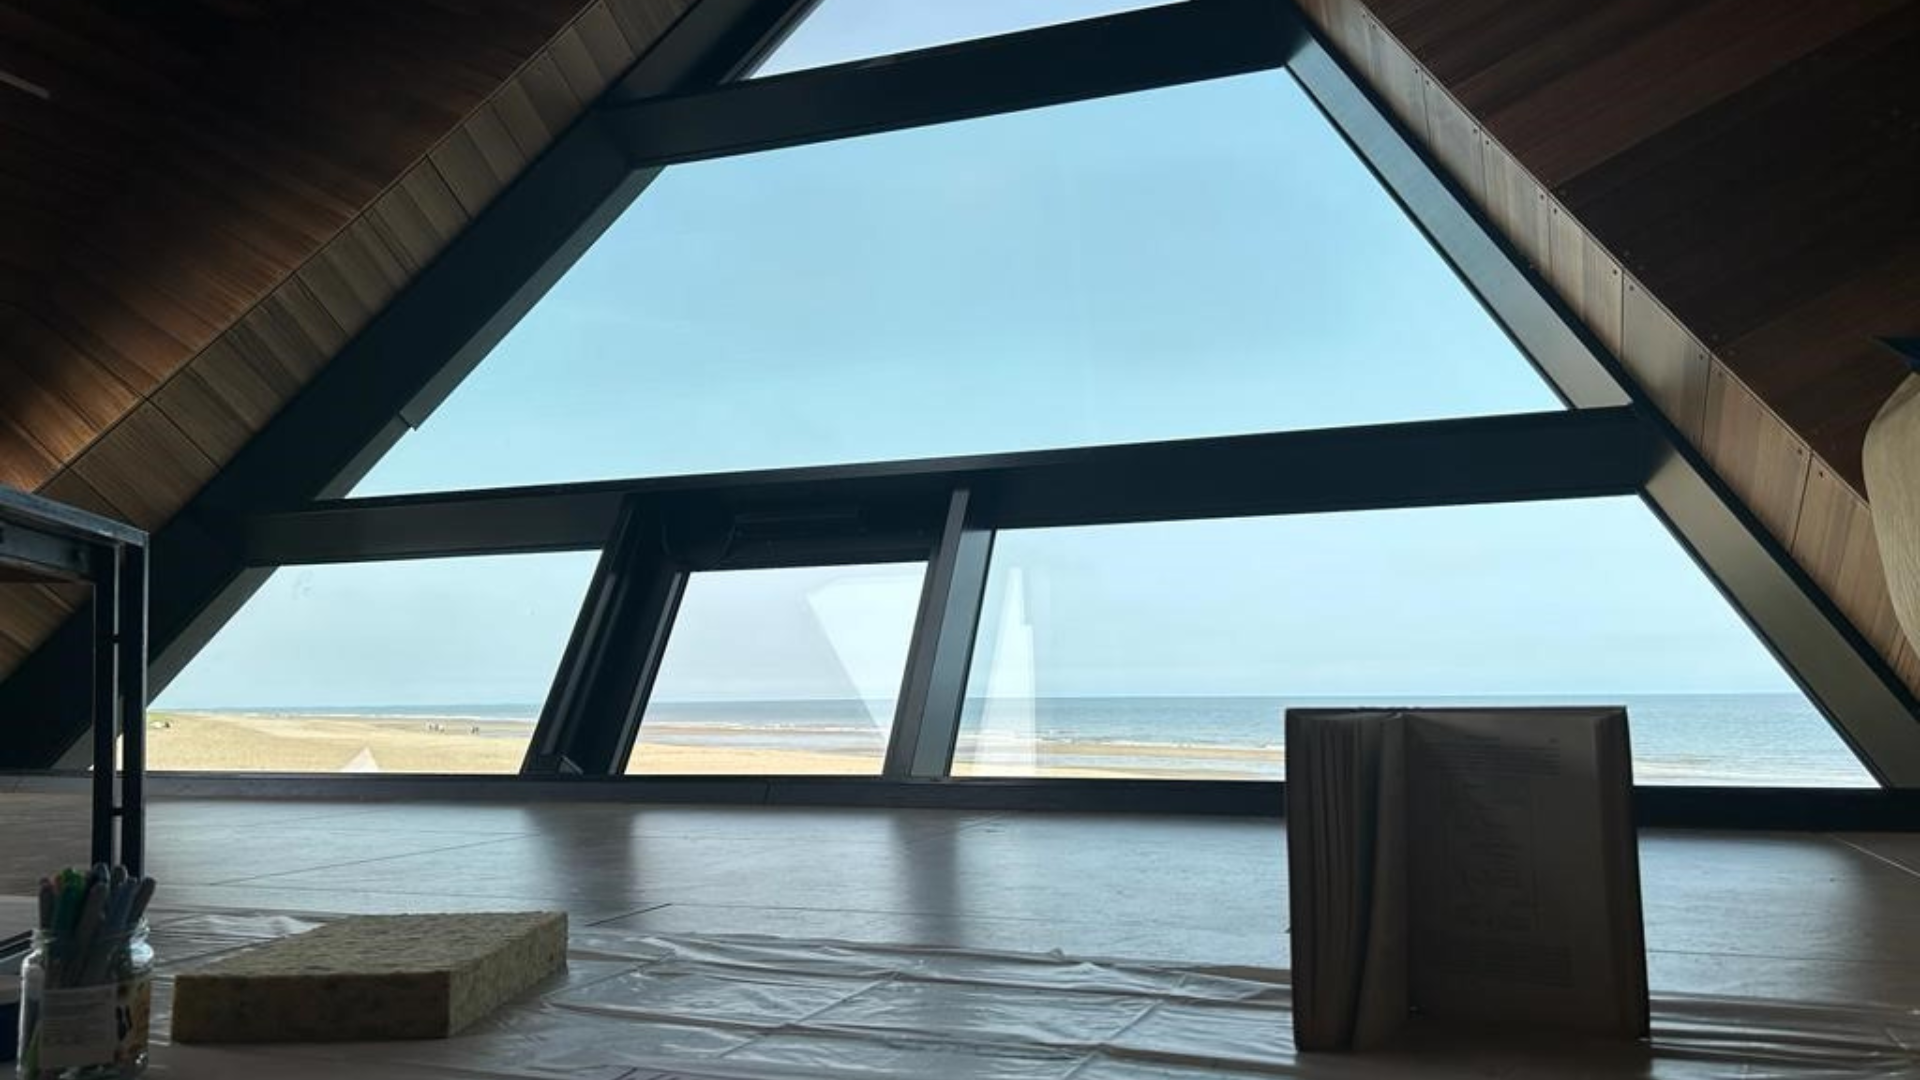 A large triangle window looking out to a beach